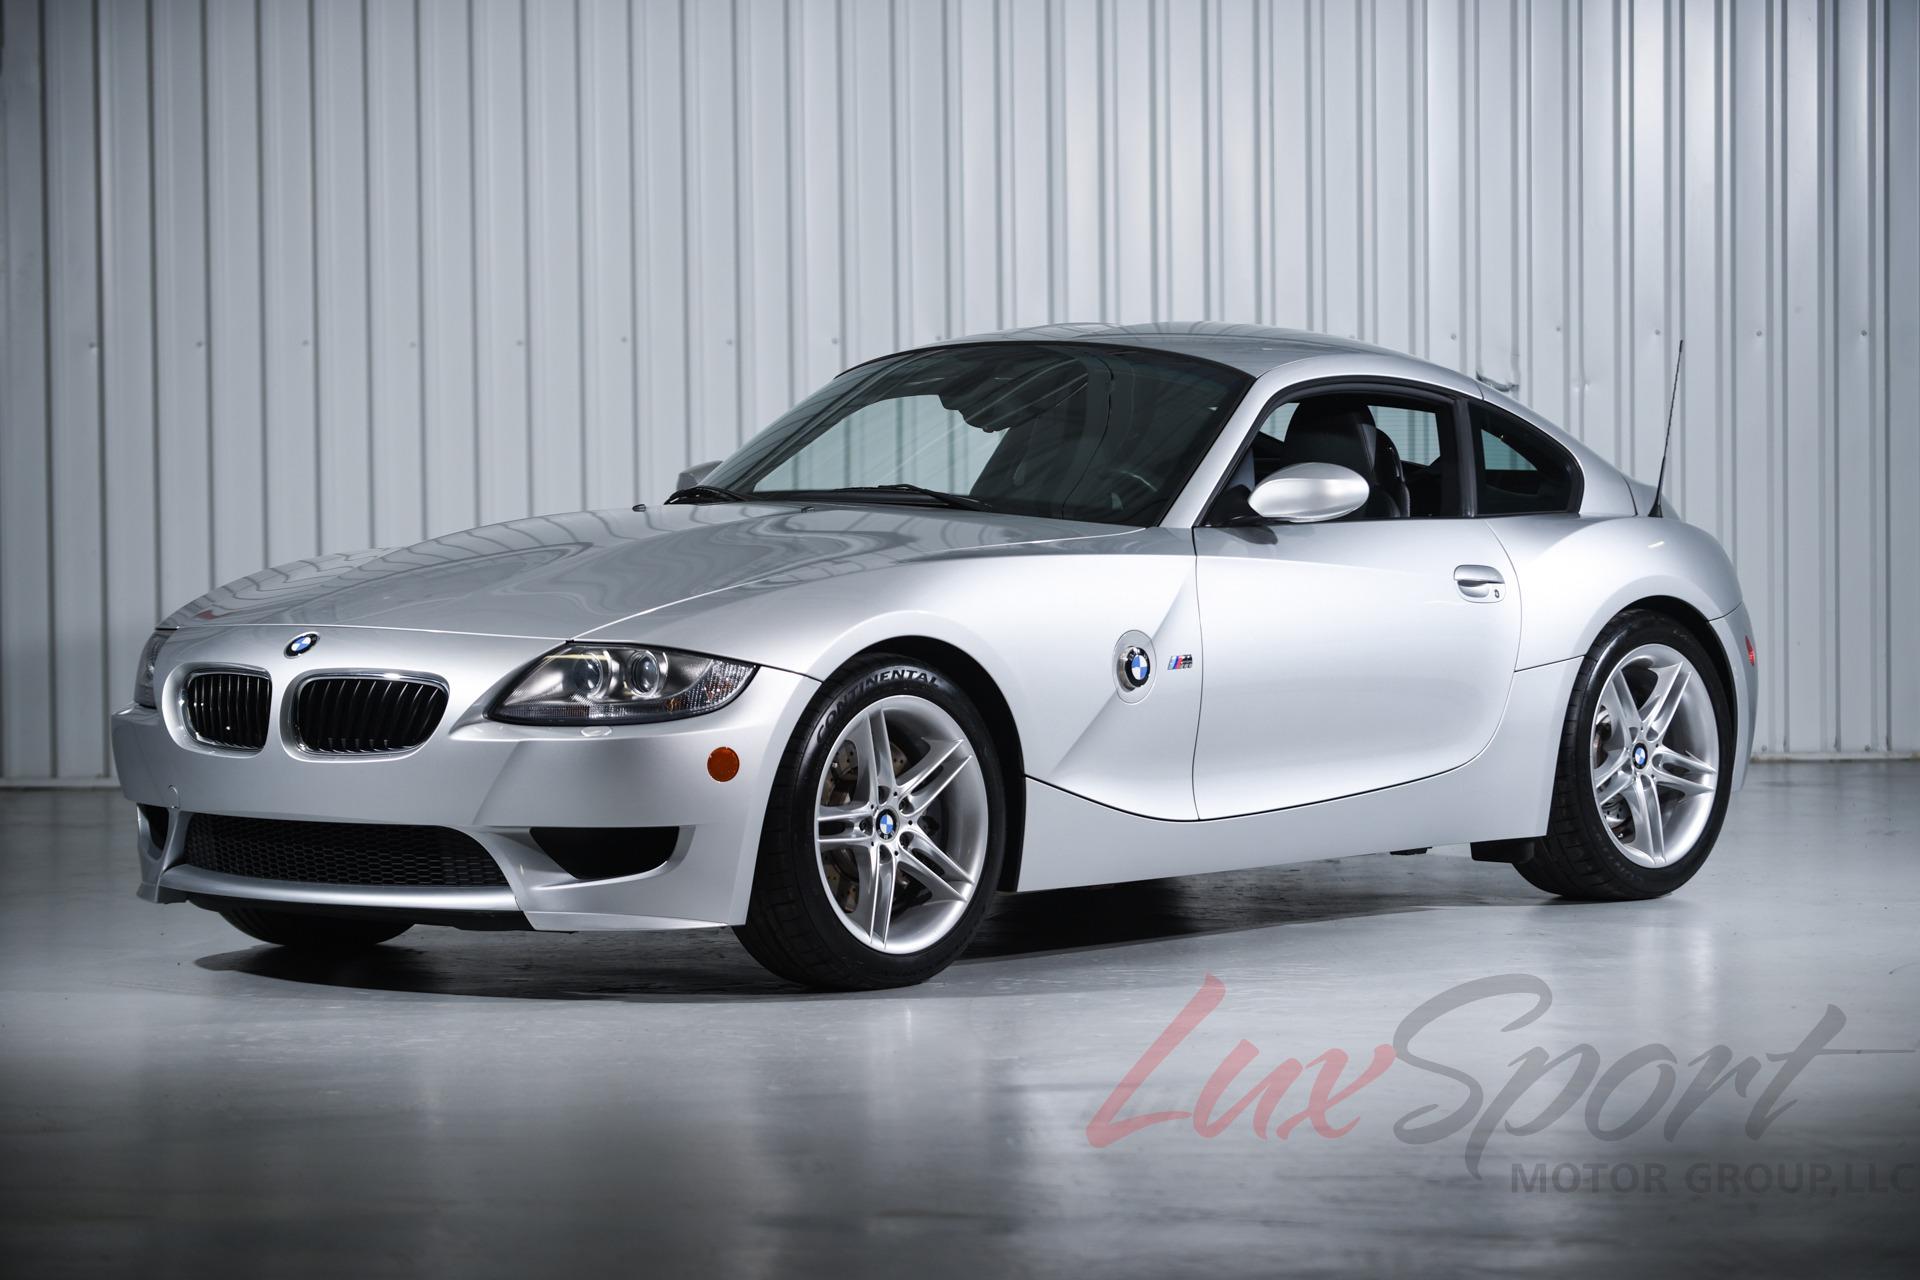 2006 BMW Z4 M Coupe Stock # 2006125 for sale near Plainview, NY | NY BMW  Dealer